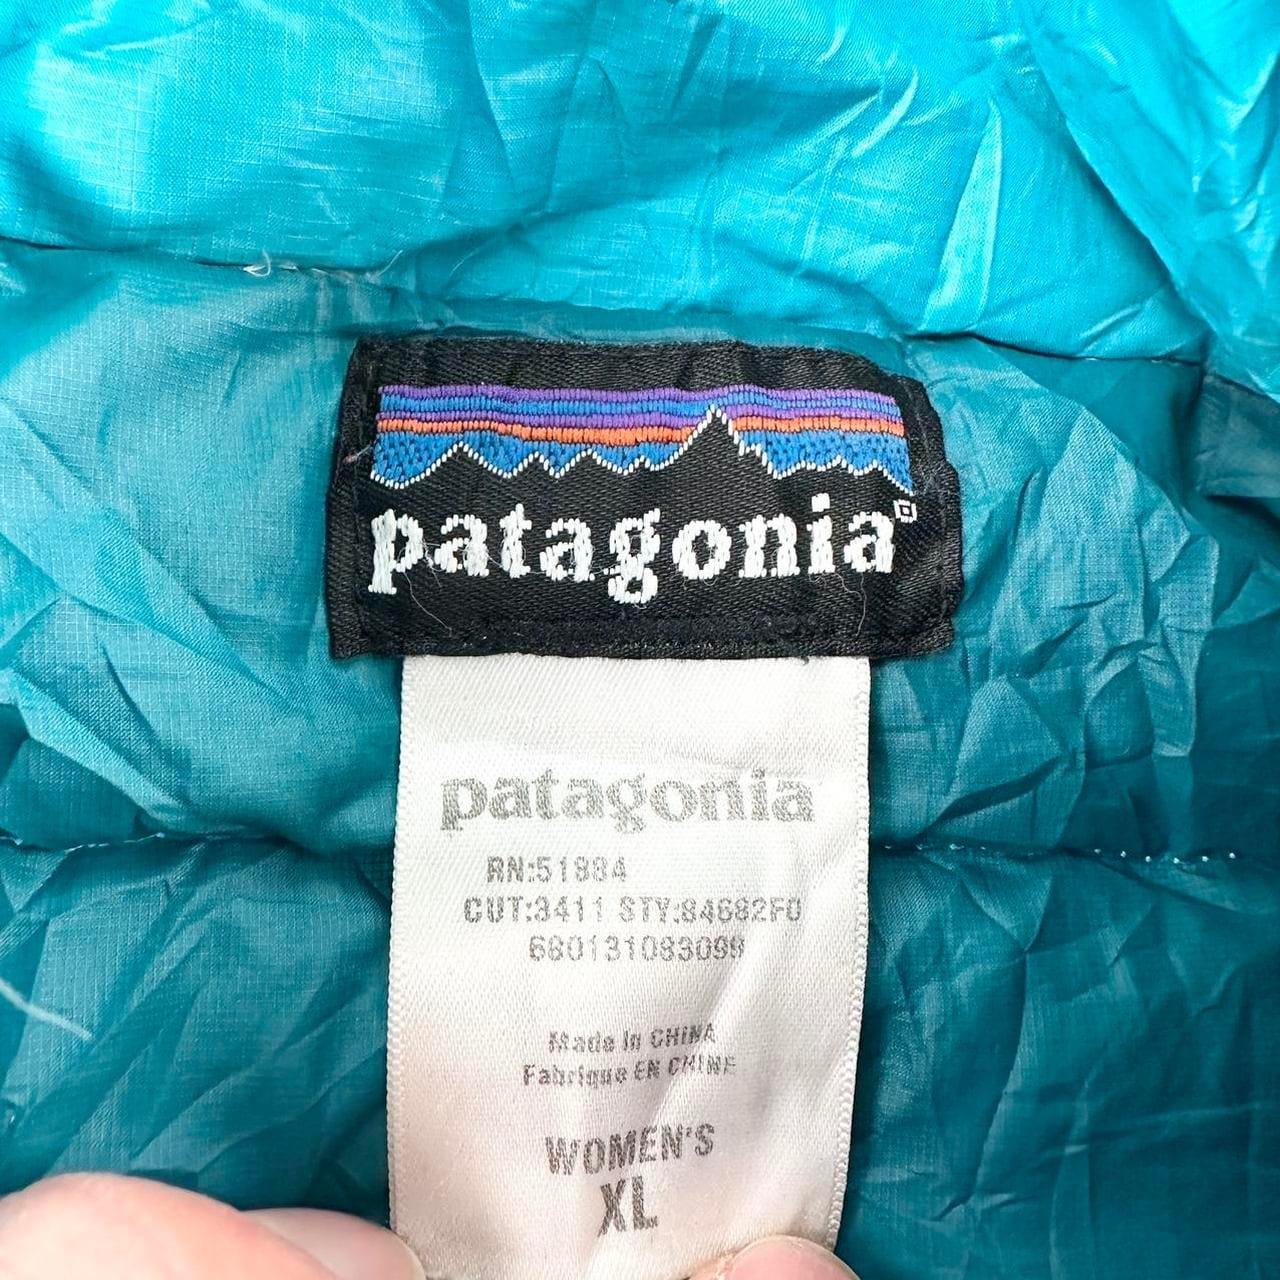 Patagonia padded jacket woman’s size XL - Known Source